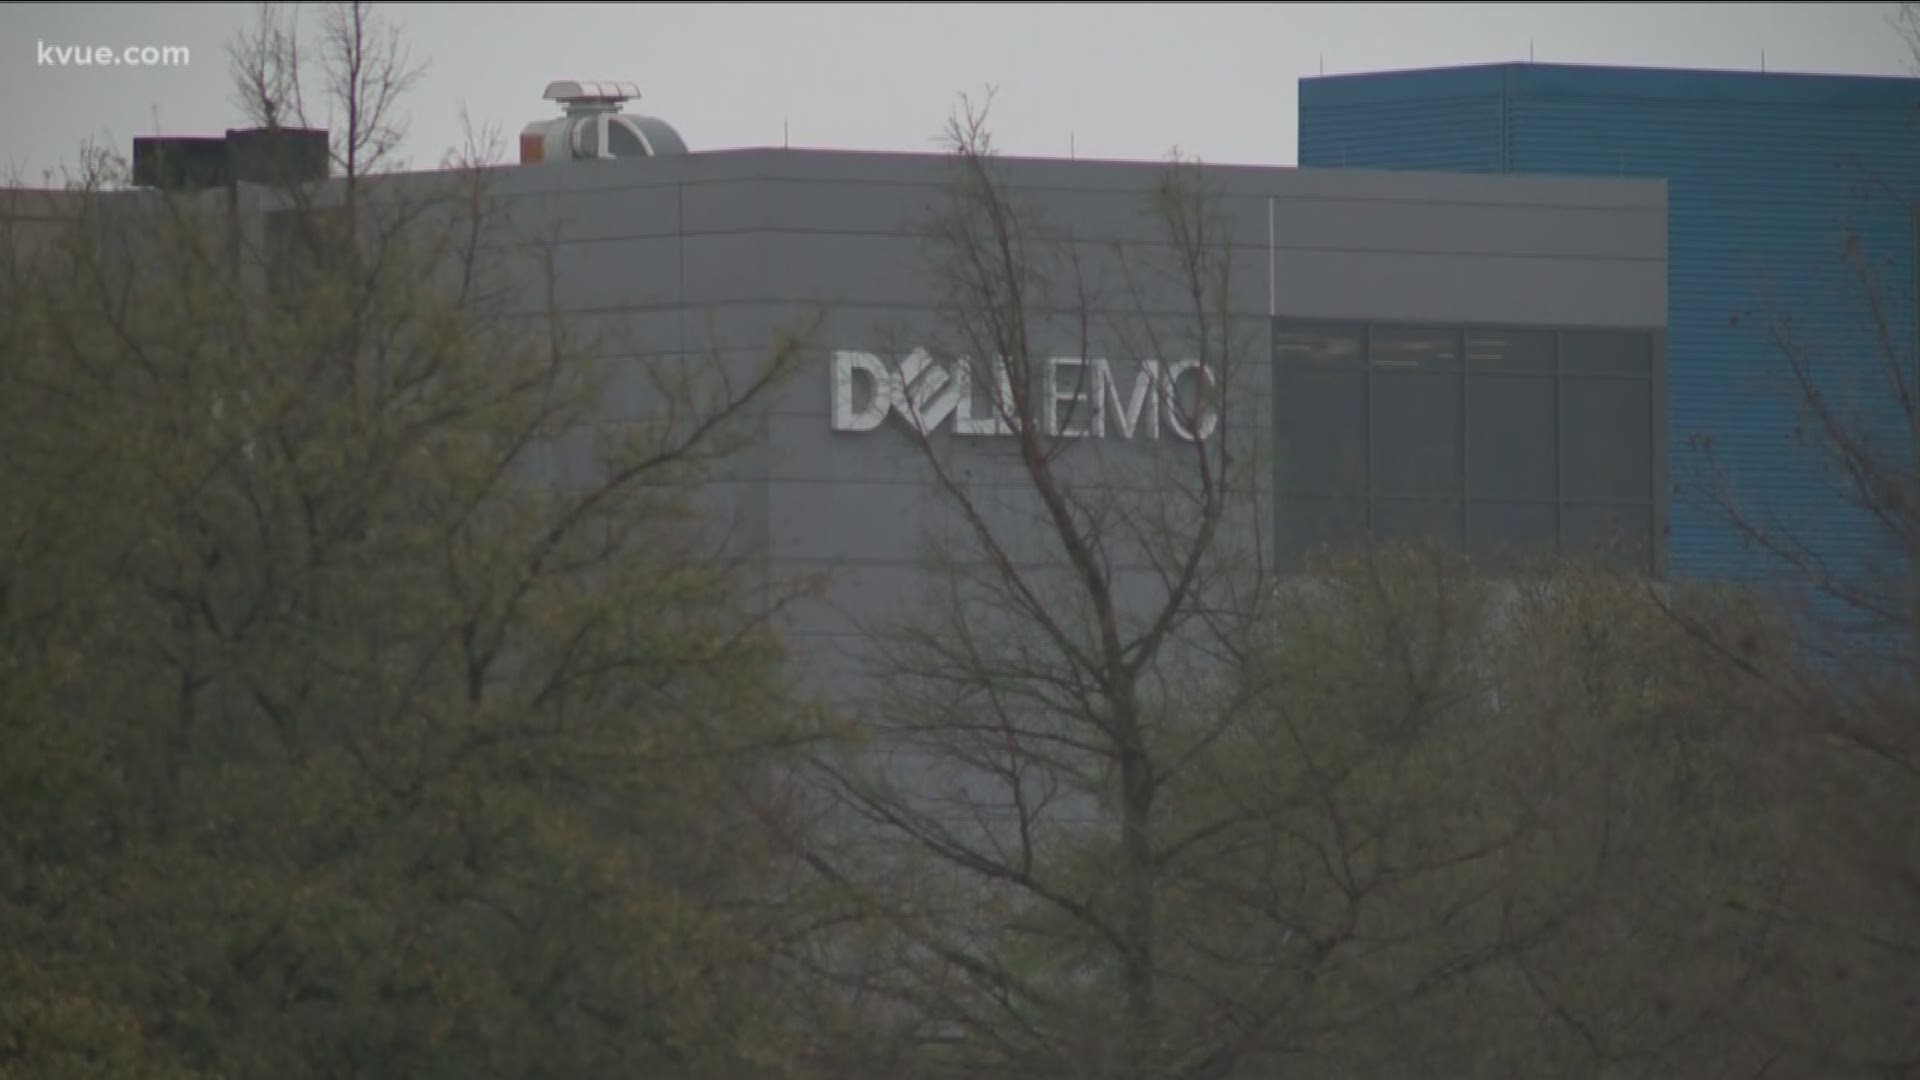 The employee was visiting the Dell offices in Round Rock until Feb. 28.